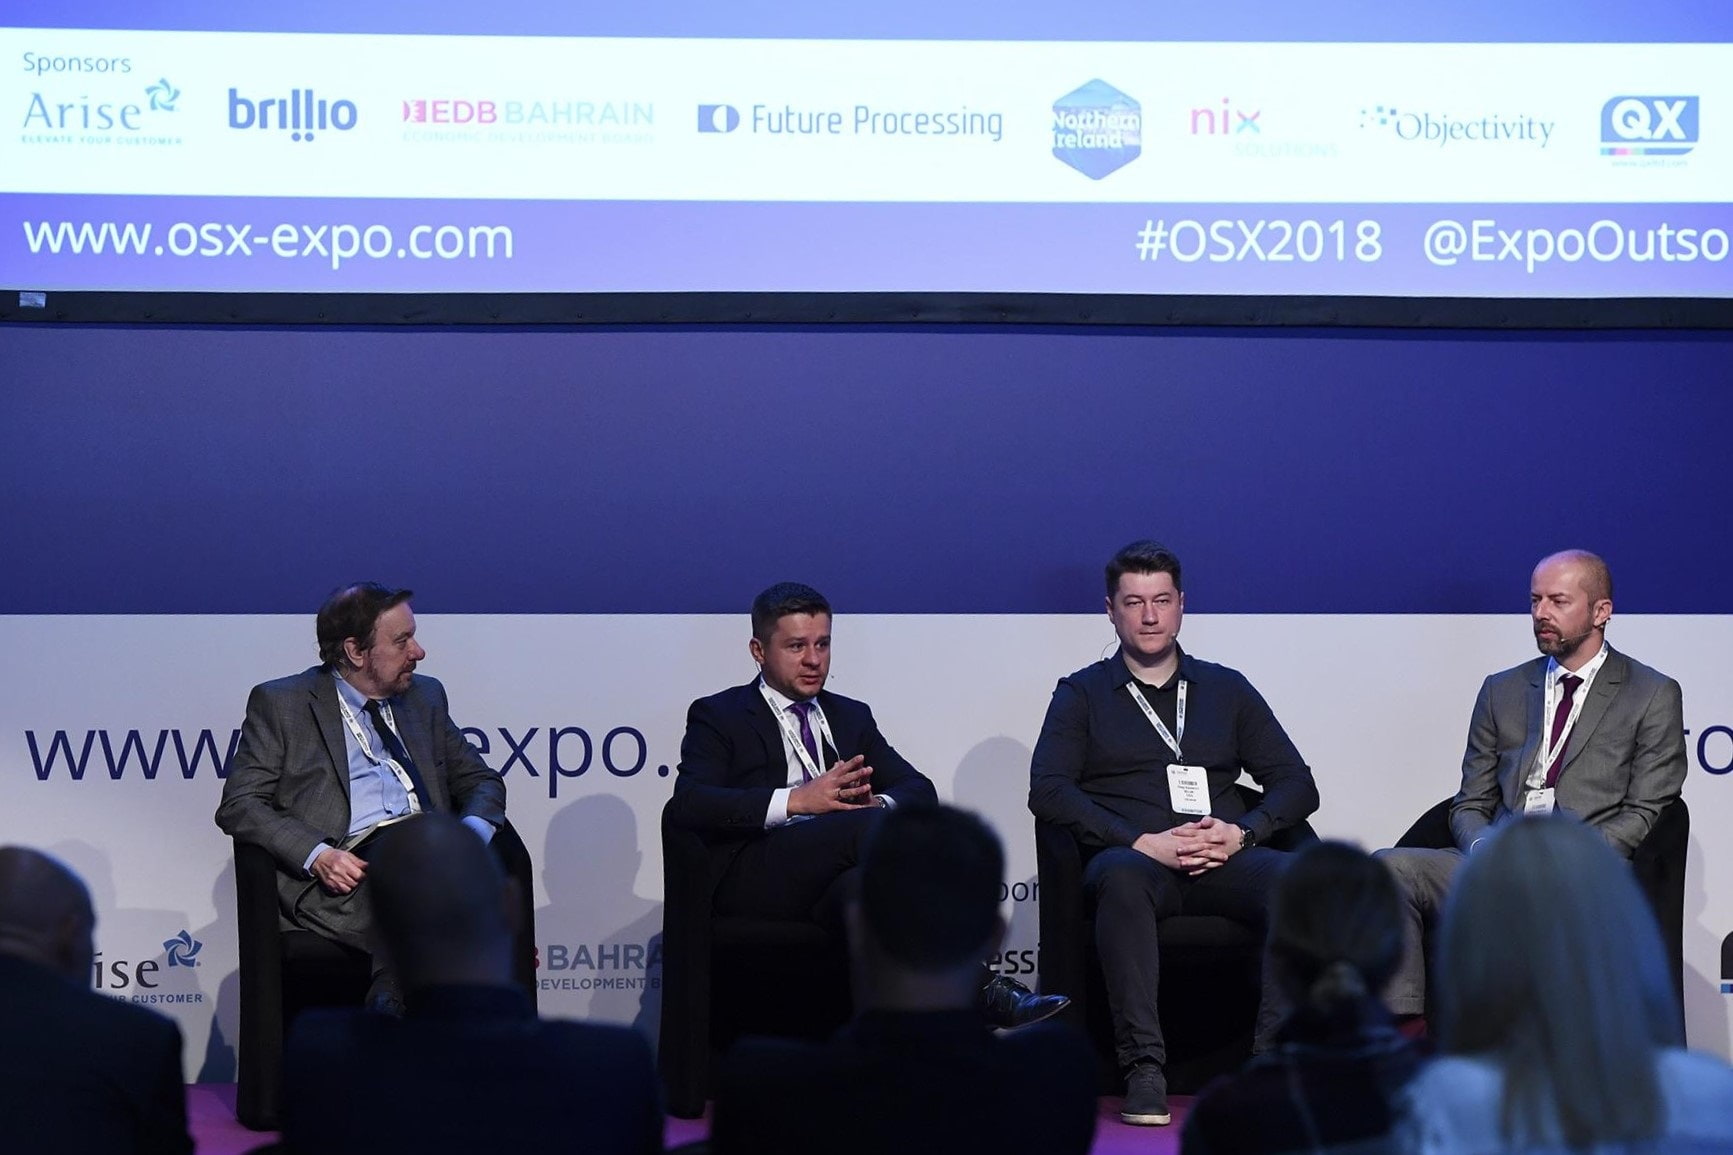 panel discussion at osx 2018